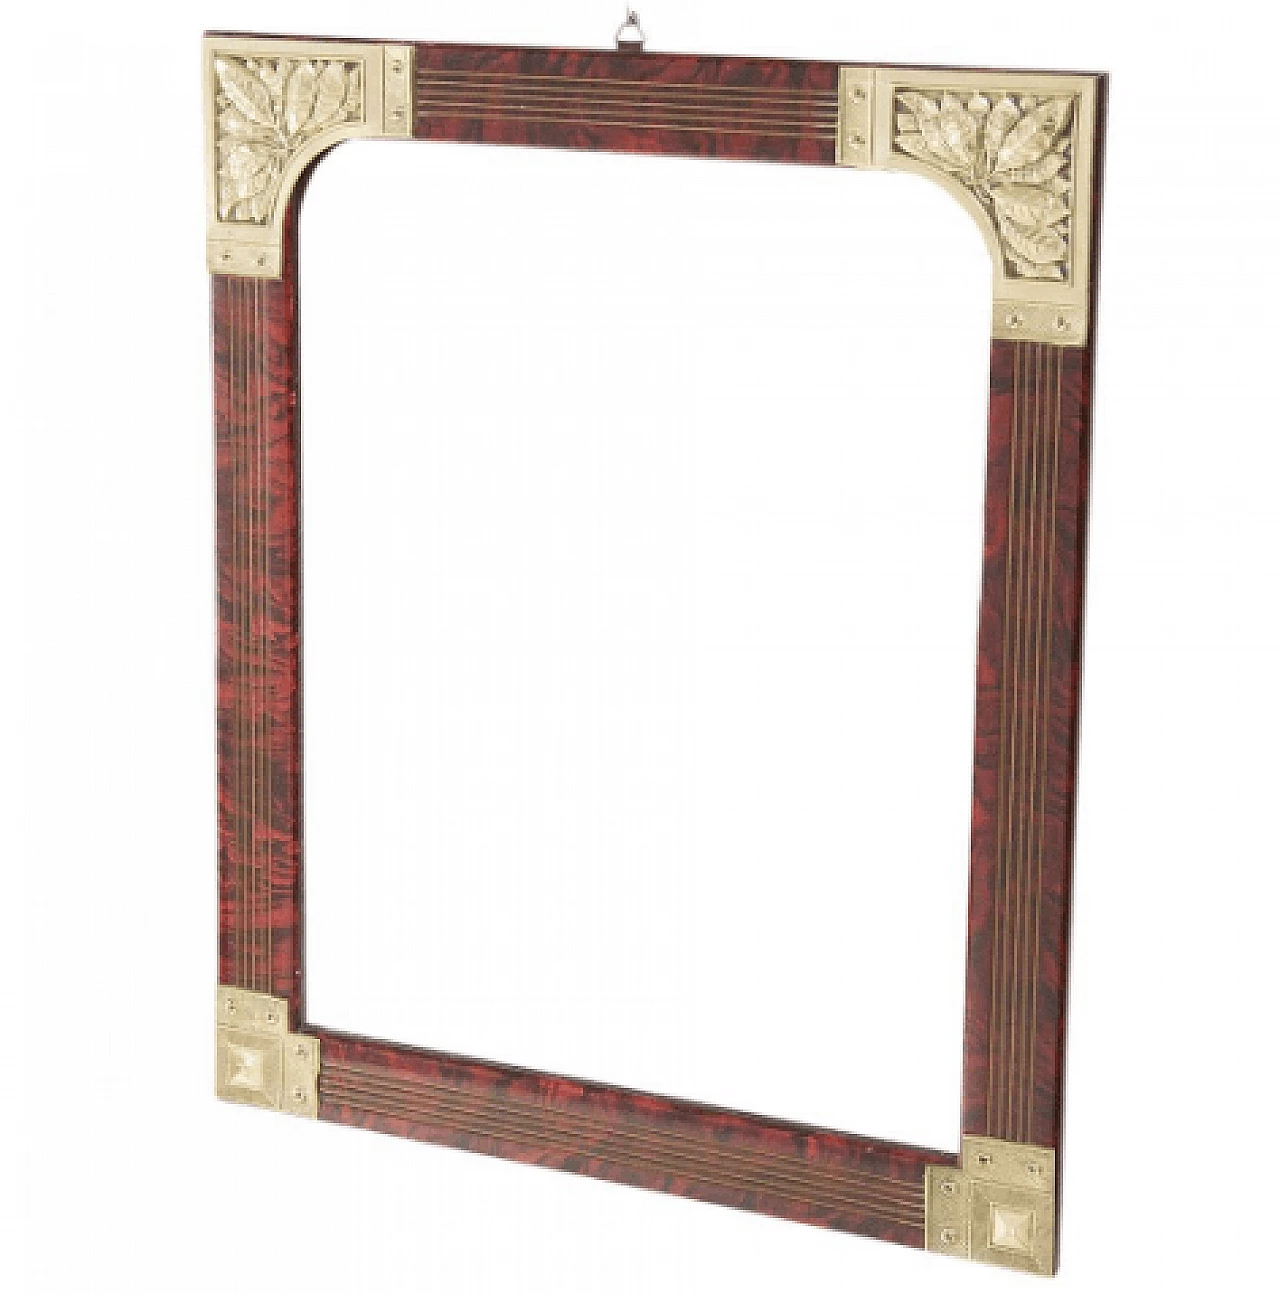 Rectangular red wood mirror with gold decoration 1